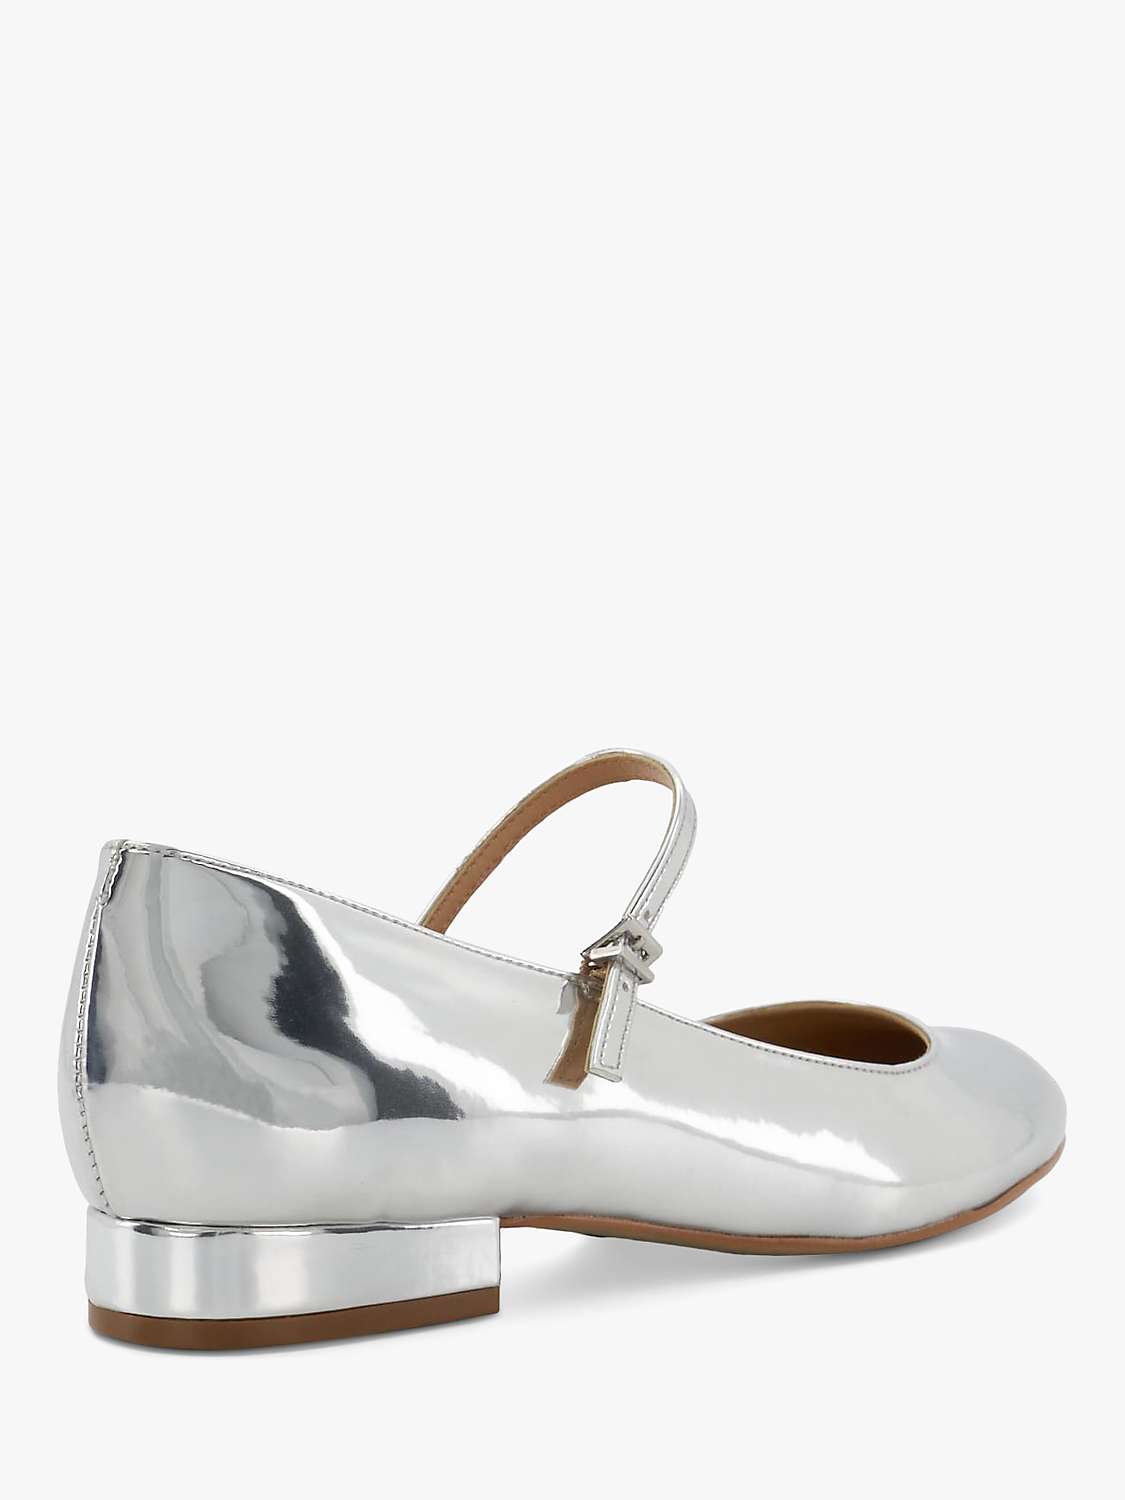 Buy Dune Hipplie Mary Jane Shoes Online at johnlewis.com